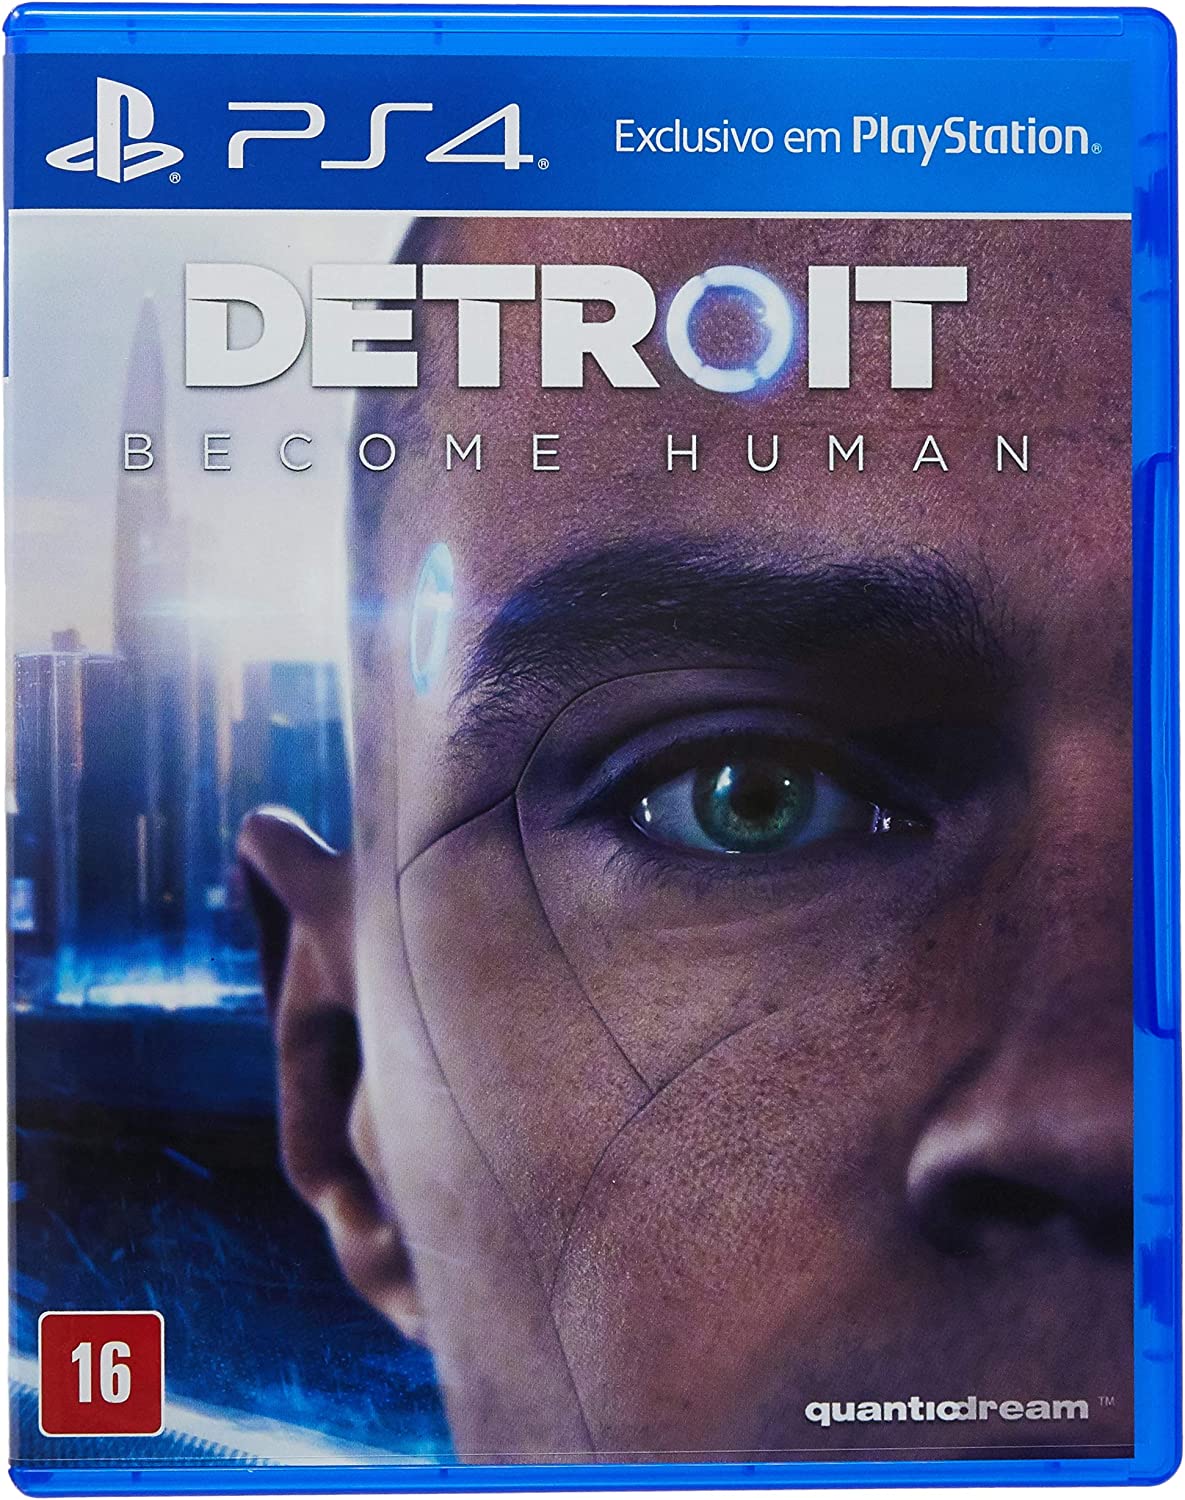 Detroit: Become Human (PS4)